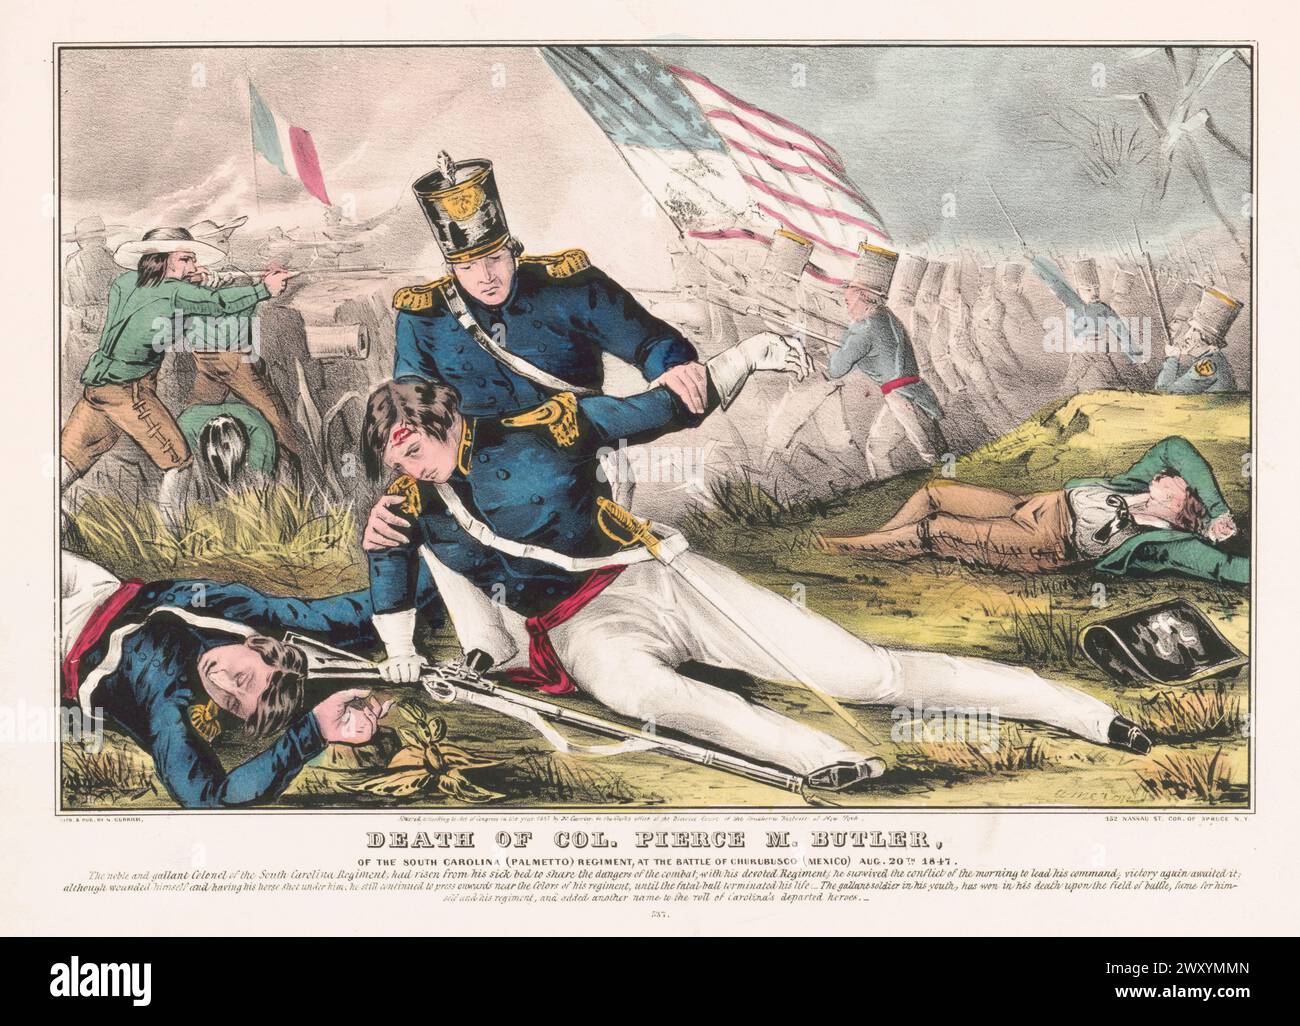 Death of Col. Pierce M. Butler Of the South Carolina (Palmetto) regiment, at The Battle of Churubusco took place on August 20, 1847, while Santa Anna's army was in retreat from the Battle of Contreras or Battle of Padierna during the Mexican–American War. It was the battle where the San Patricio Battalion, made up largely of US deserters, made their last stand against U.S. forces. The U.S. Army was victorious, outnumbering more than six-to-one the defending Mexican troops. After the battle, the U.S. Army was only 5 miles (8 km) away from Mexico City. 50 Saint Patrick's Battalion members were o Stock Photo